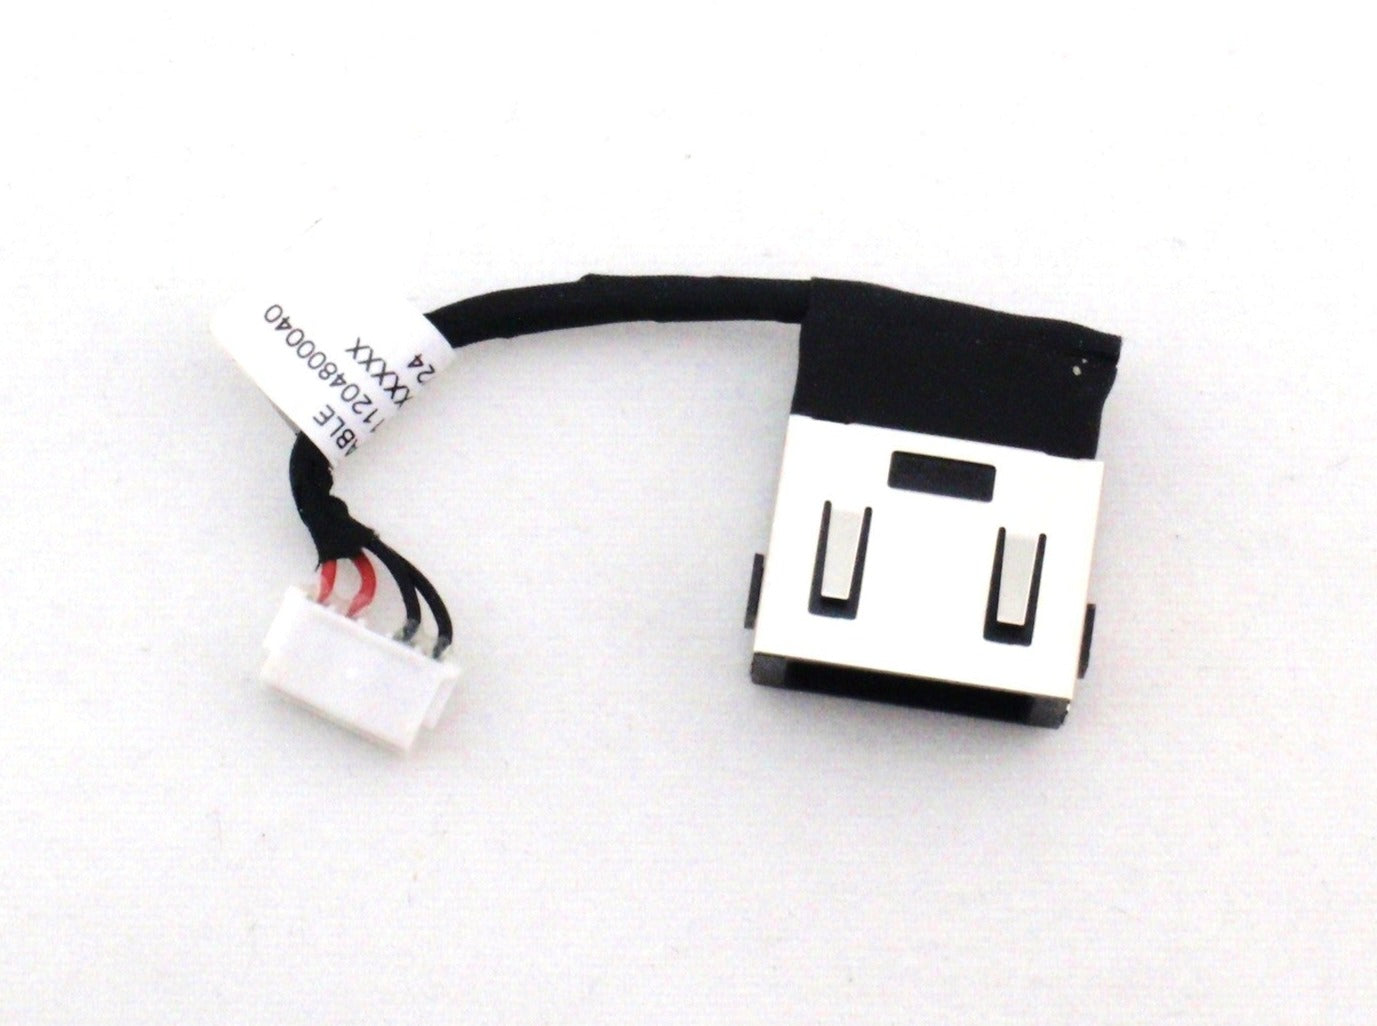 Lenovo New DC In Power Jack Charging Port Connector Socket Cable IdeaPad V530S 3nod 64411204800040